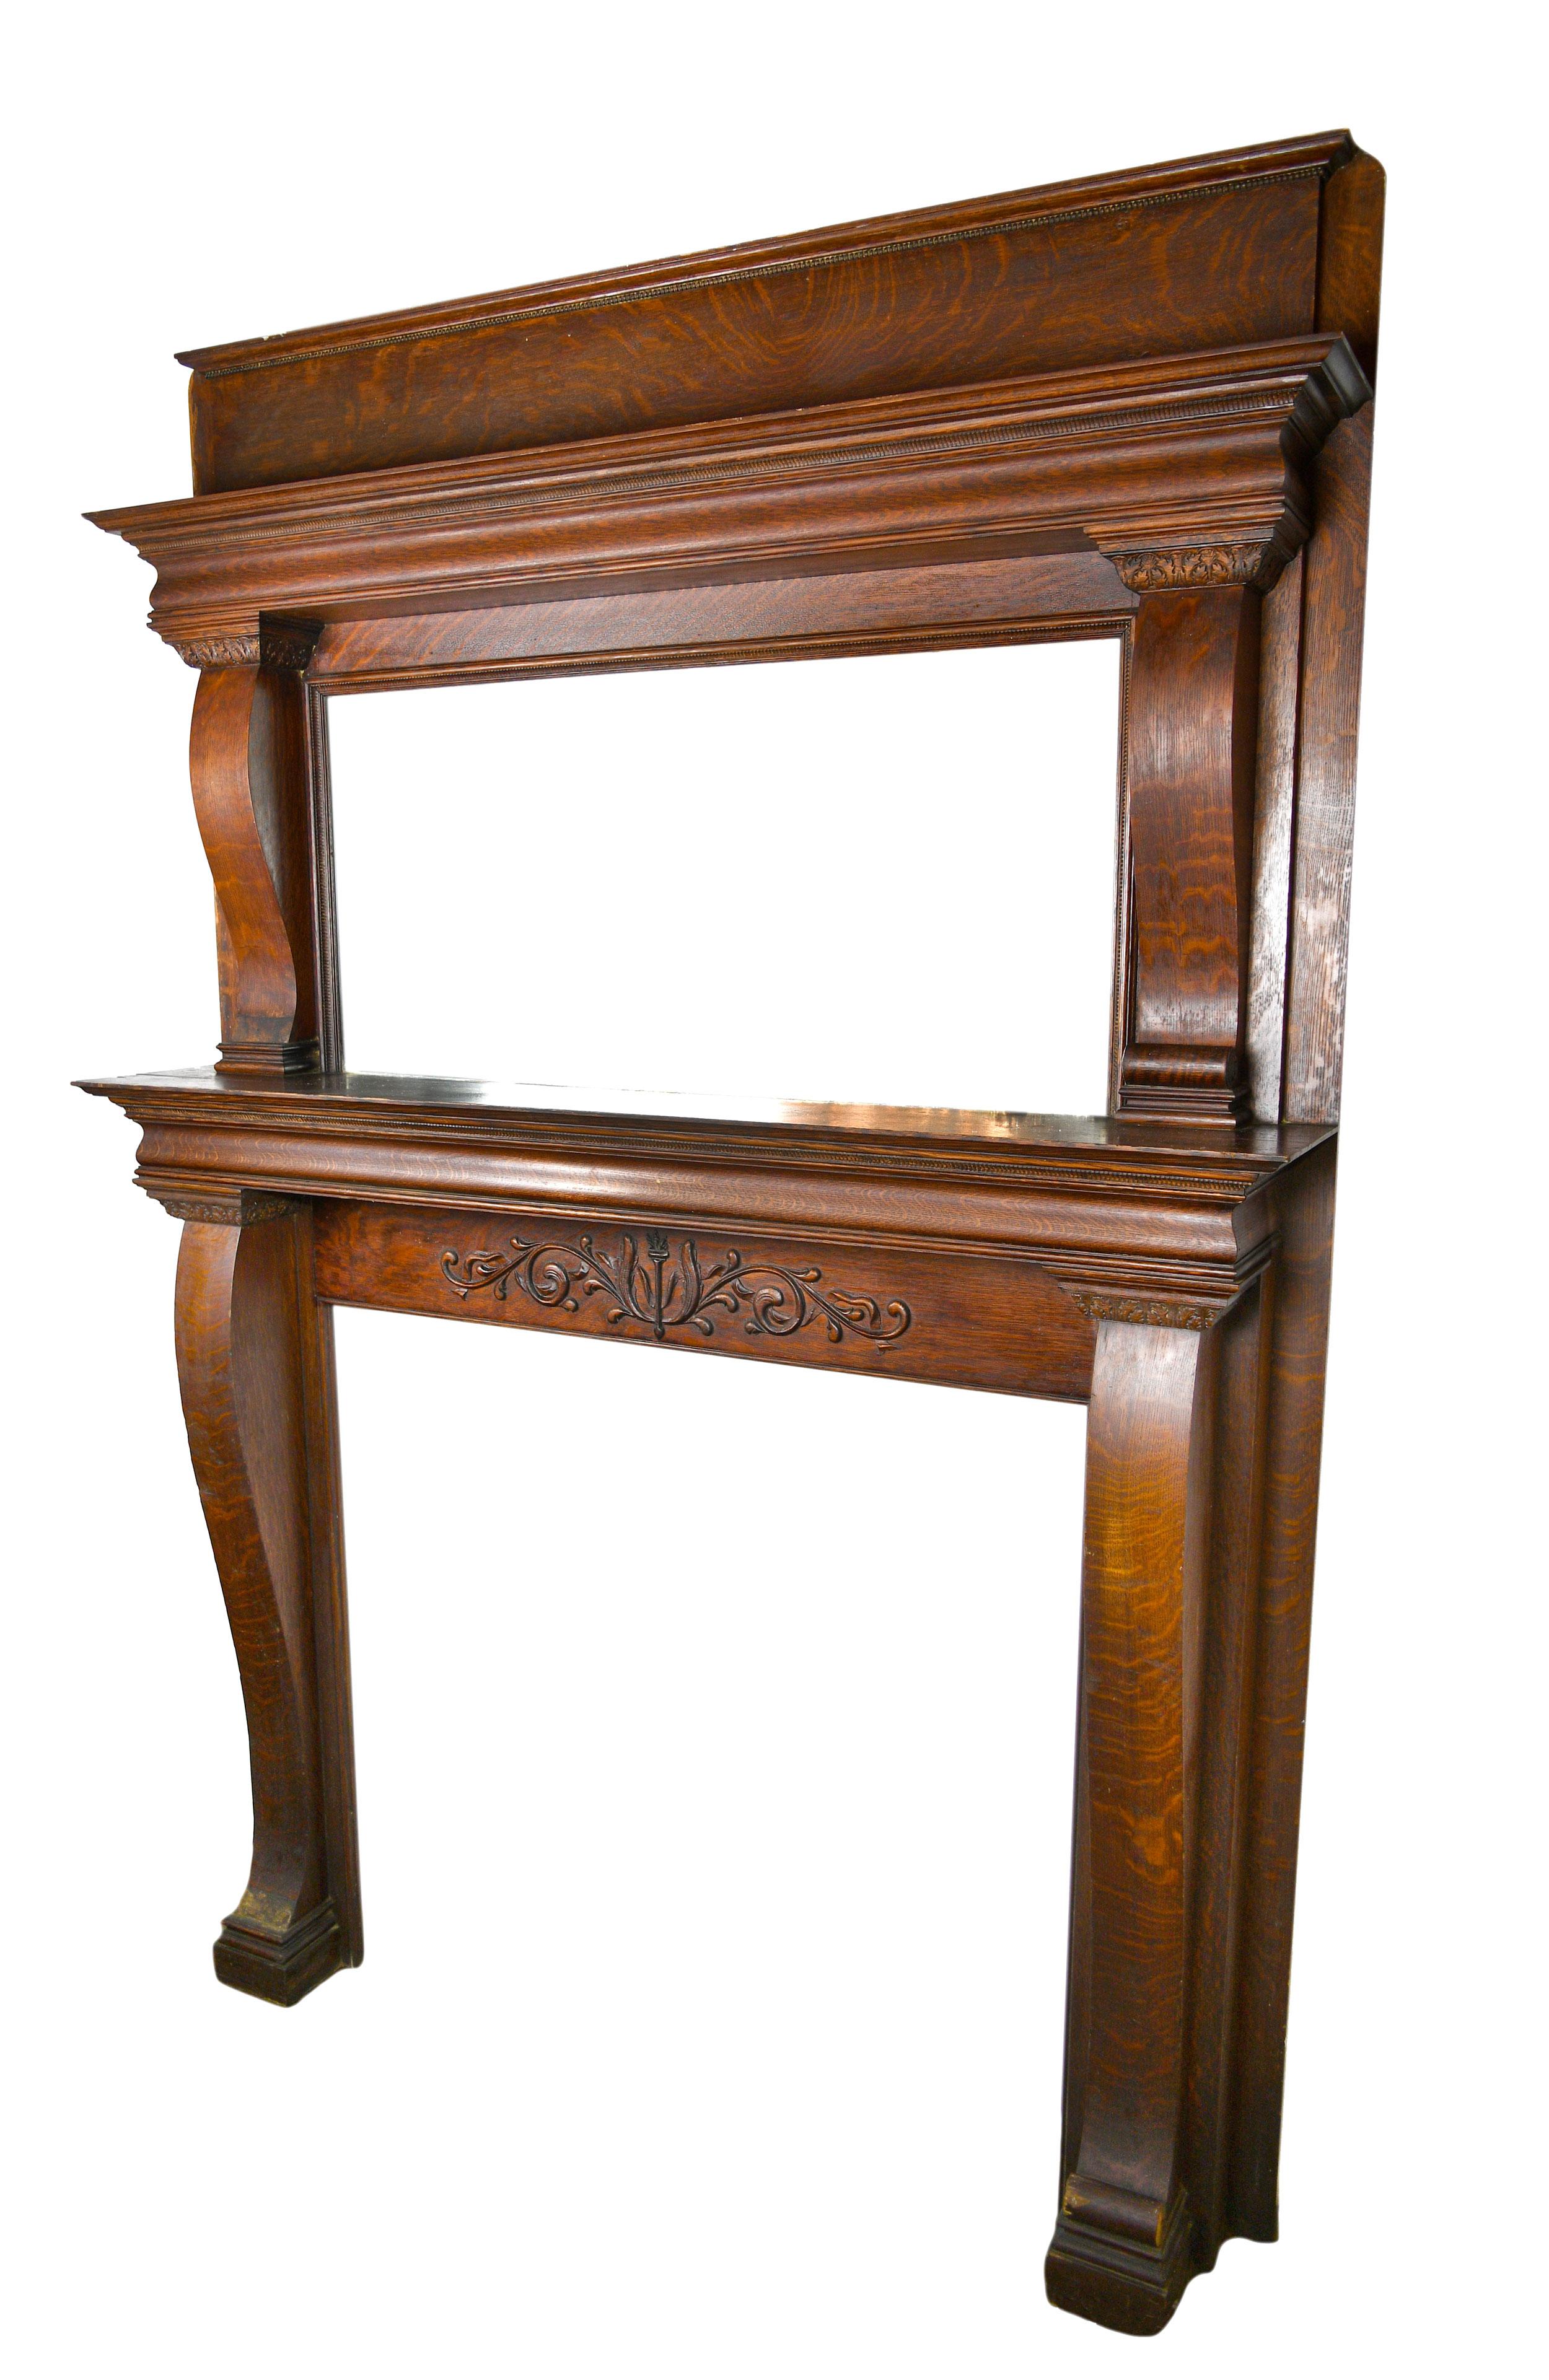 This lovingly crafted mantel is made of handsome quarter sawn oak and features a large glass mirror and two curved corbels. This mantel features a finely detailed Empire/ colonial design style.

Dimensions: 
Overall 60” wide x 87 5/8” tall x